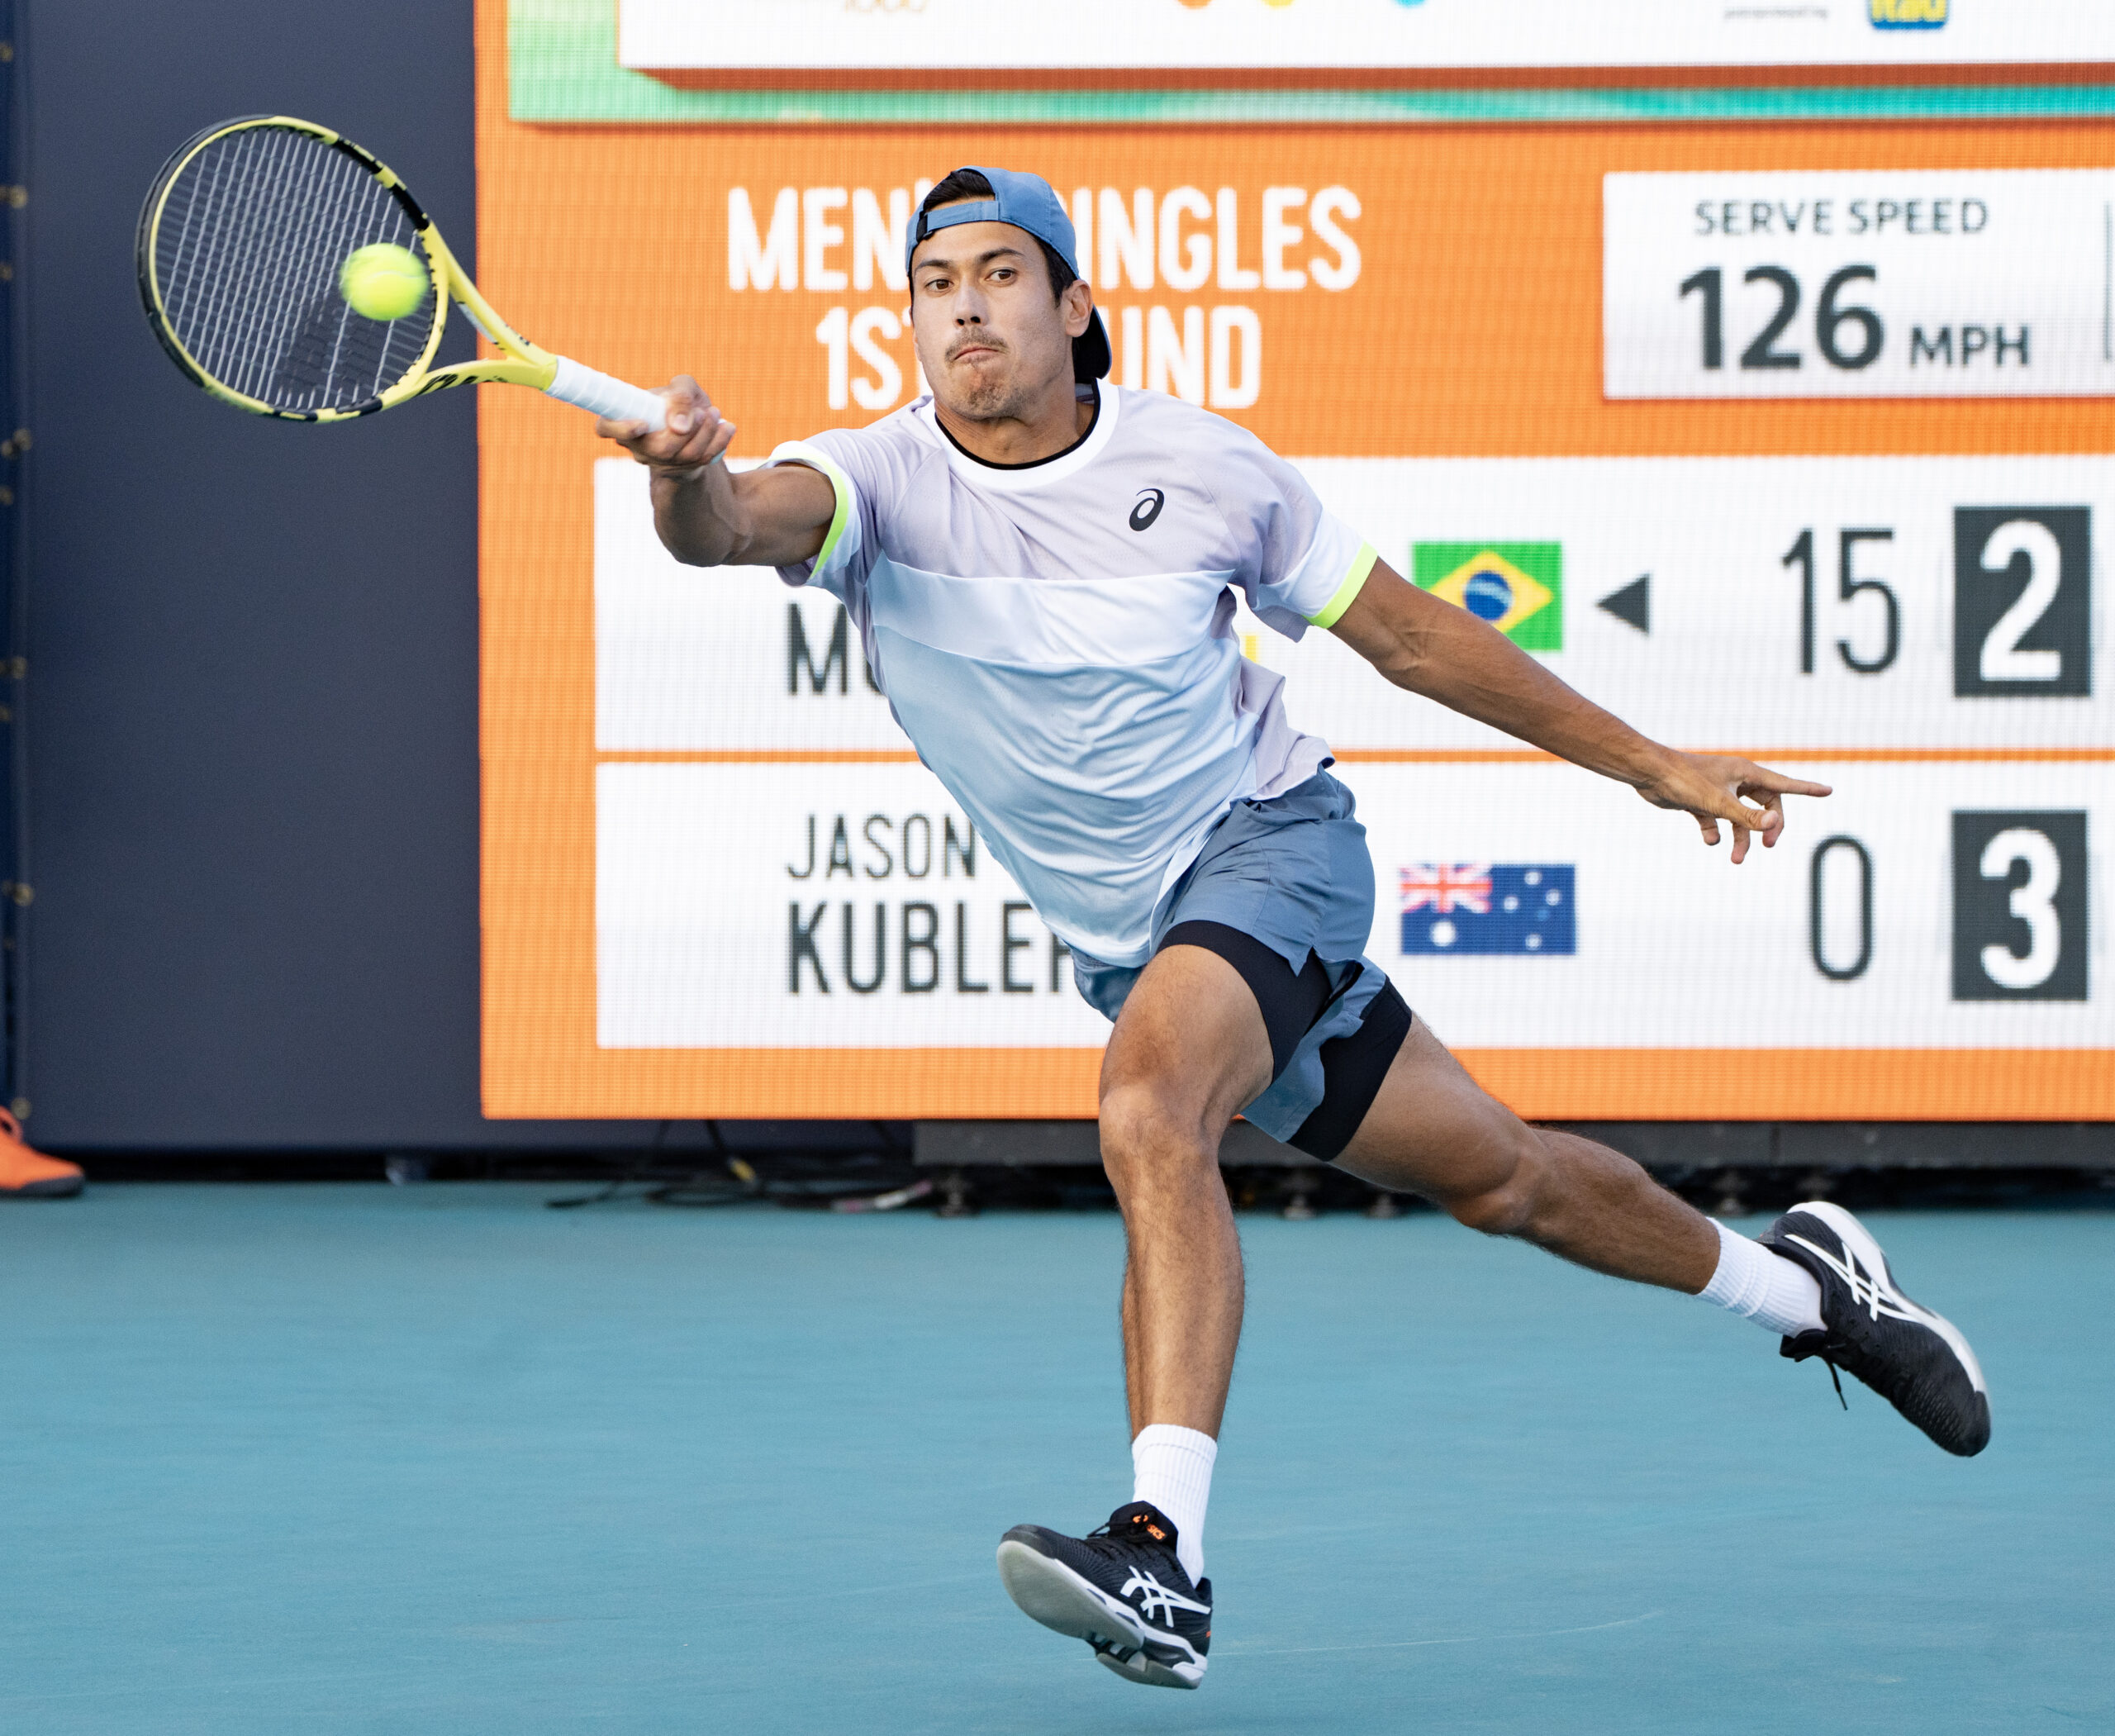 Jason Kubler stretches for a forehand during the 2023 Miami Open